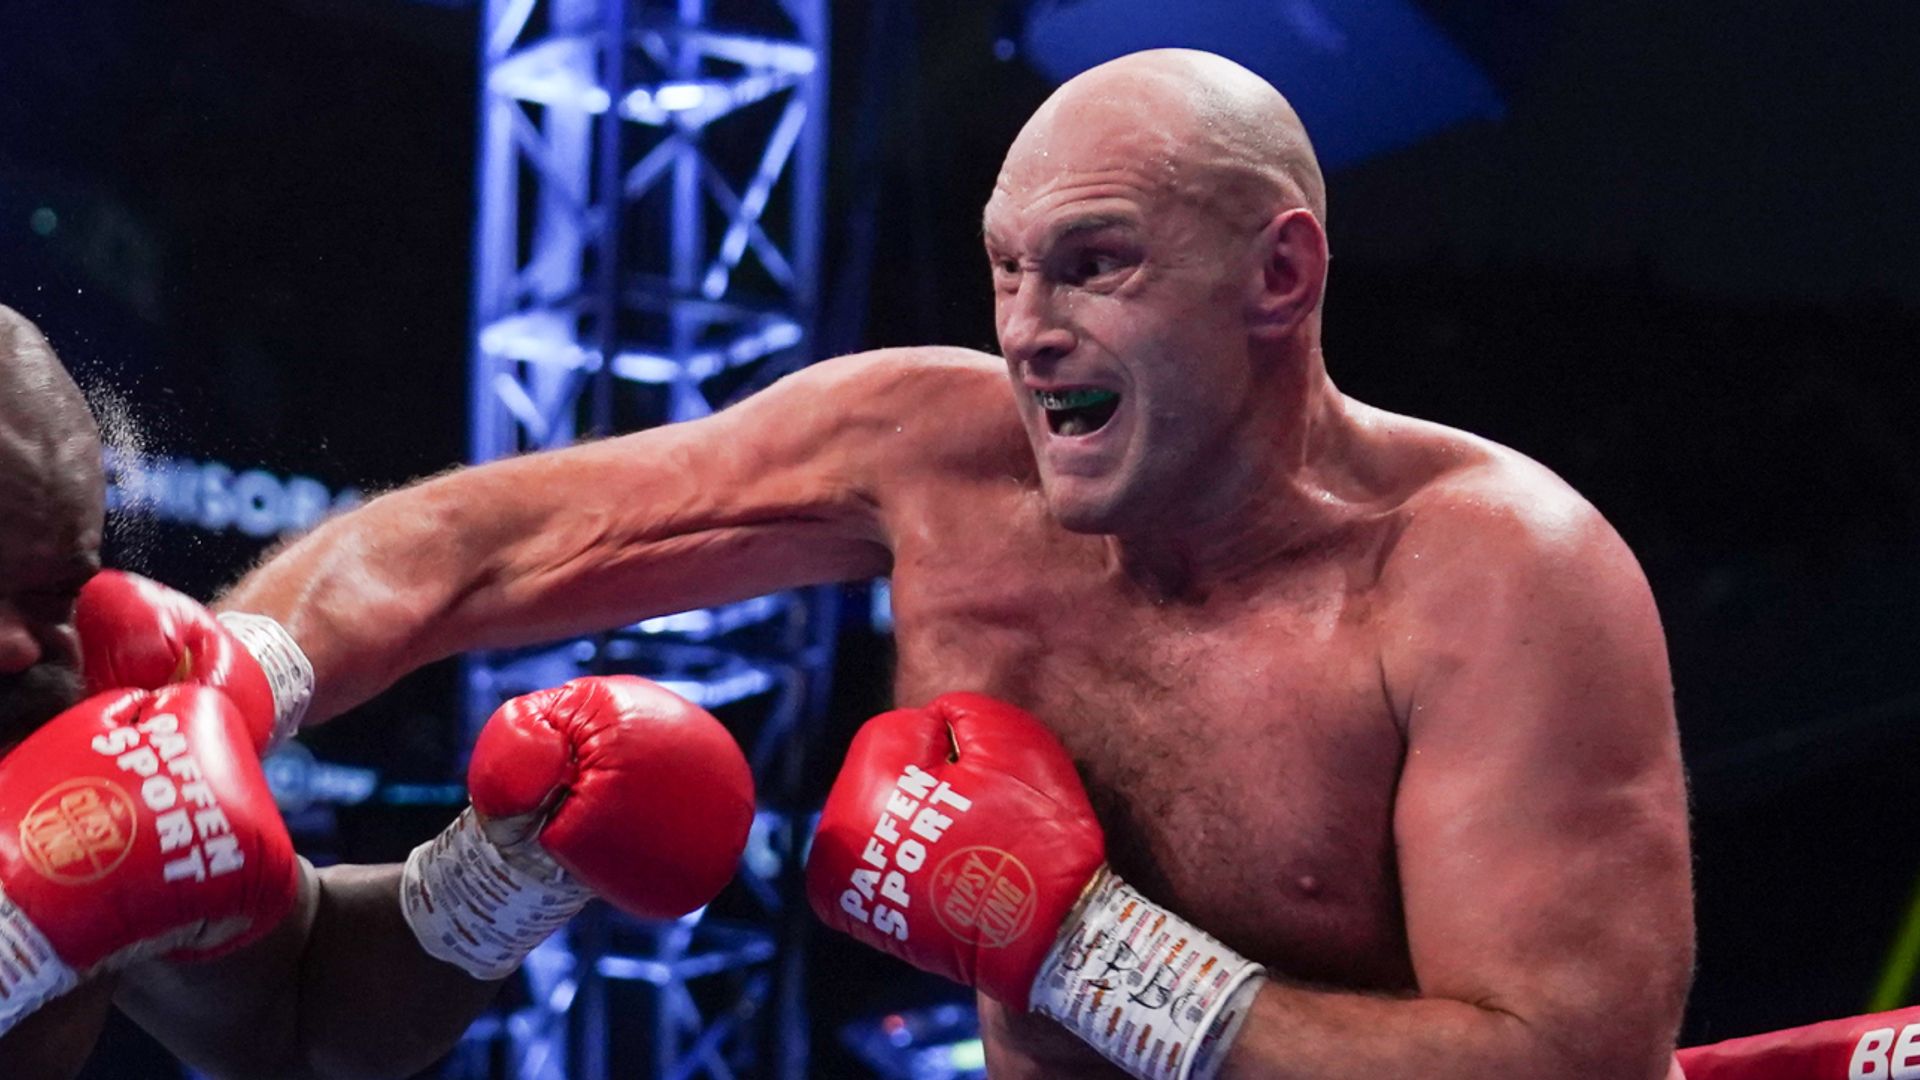 Fury reveals what next: Either Usyk early in 2023 or Joyce at Wembley